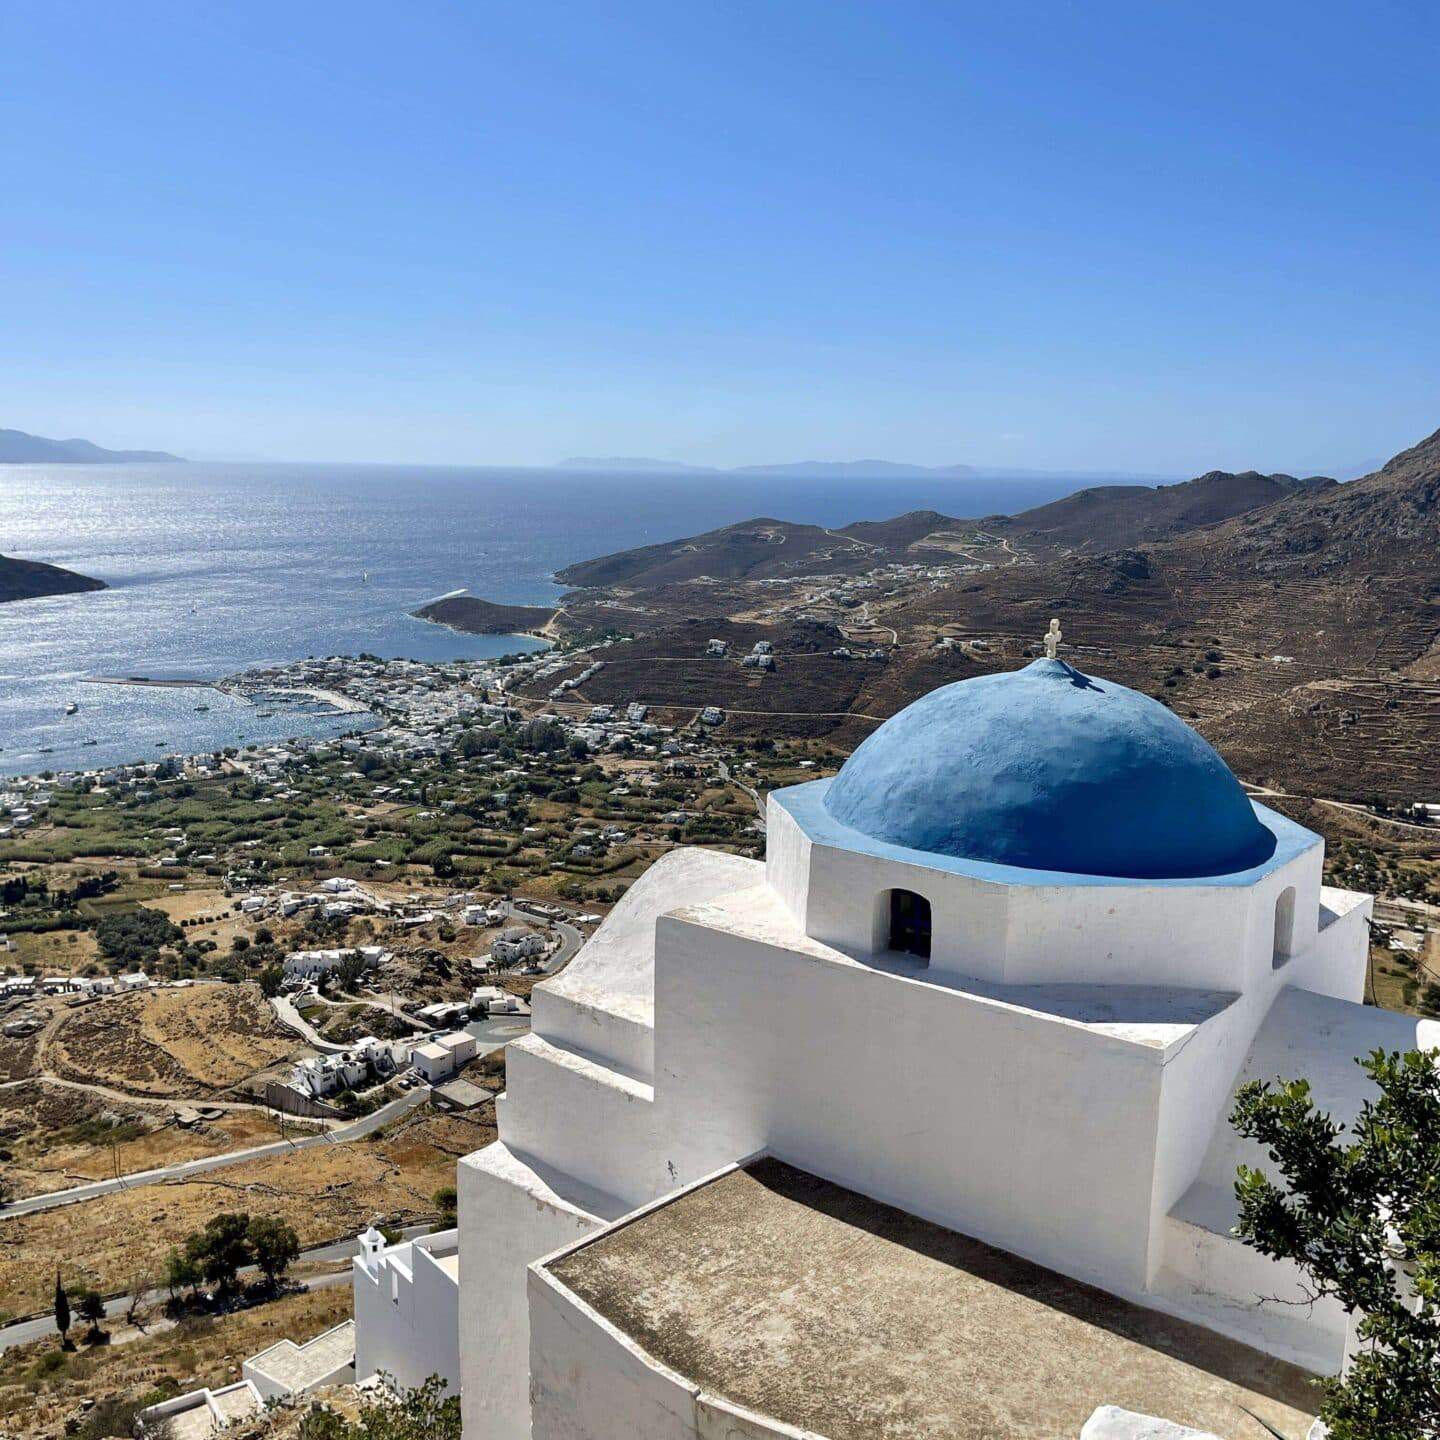 Solo Travel to the Greek Island of Serifos